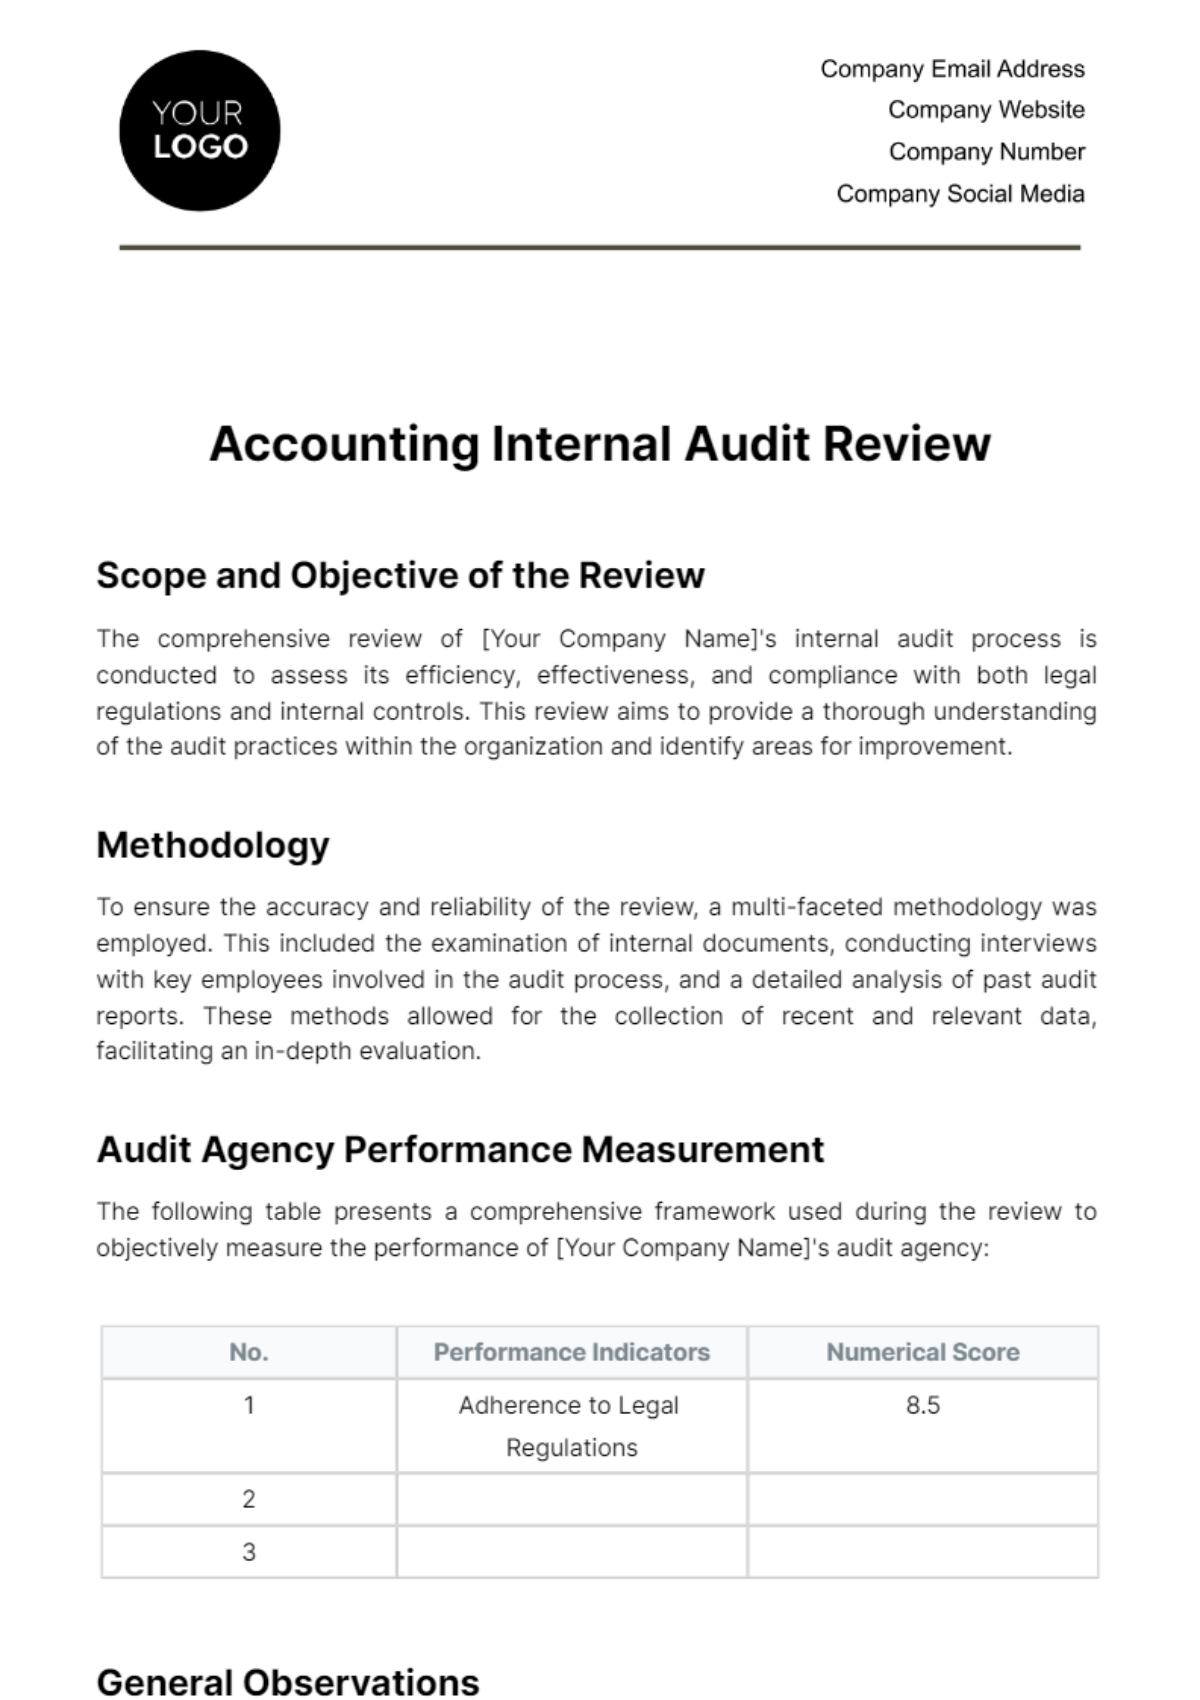 Free Accounting Internal Audit Review Template